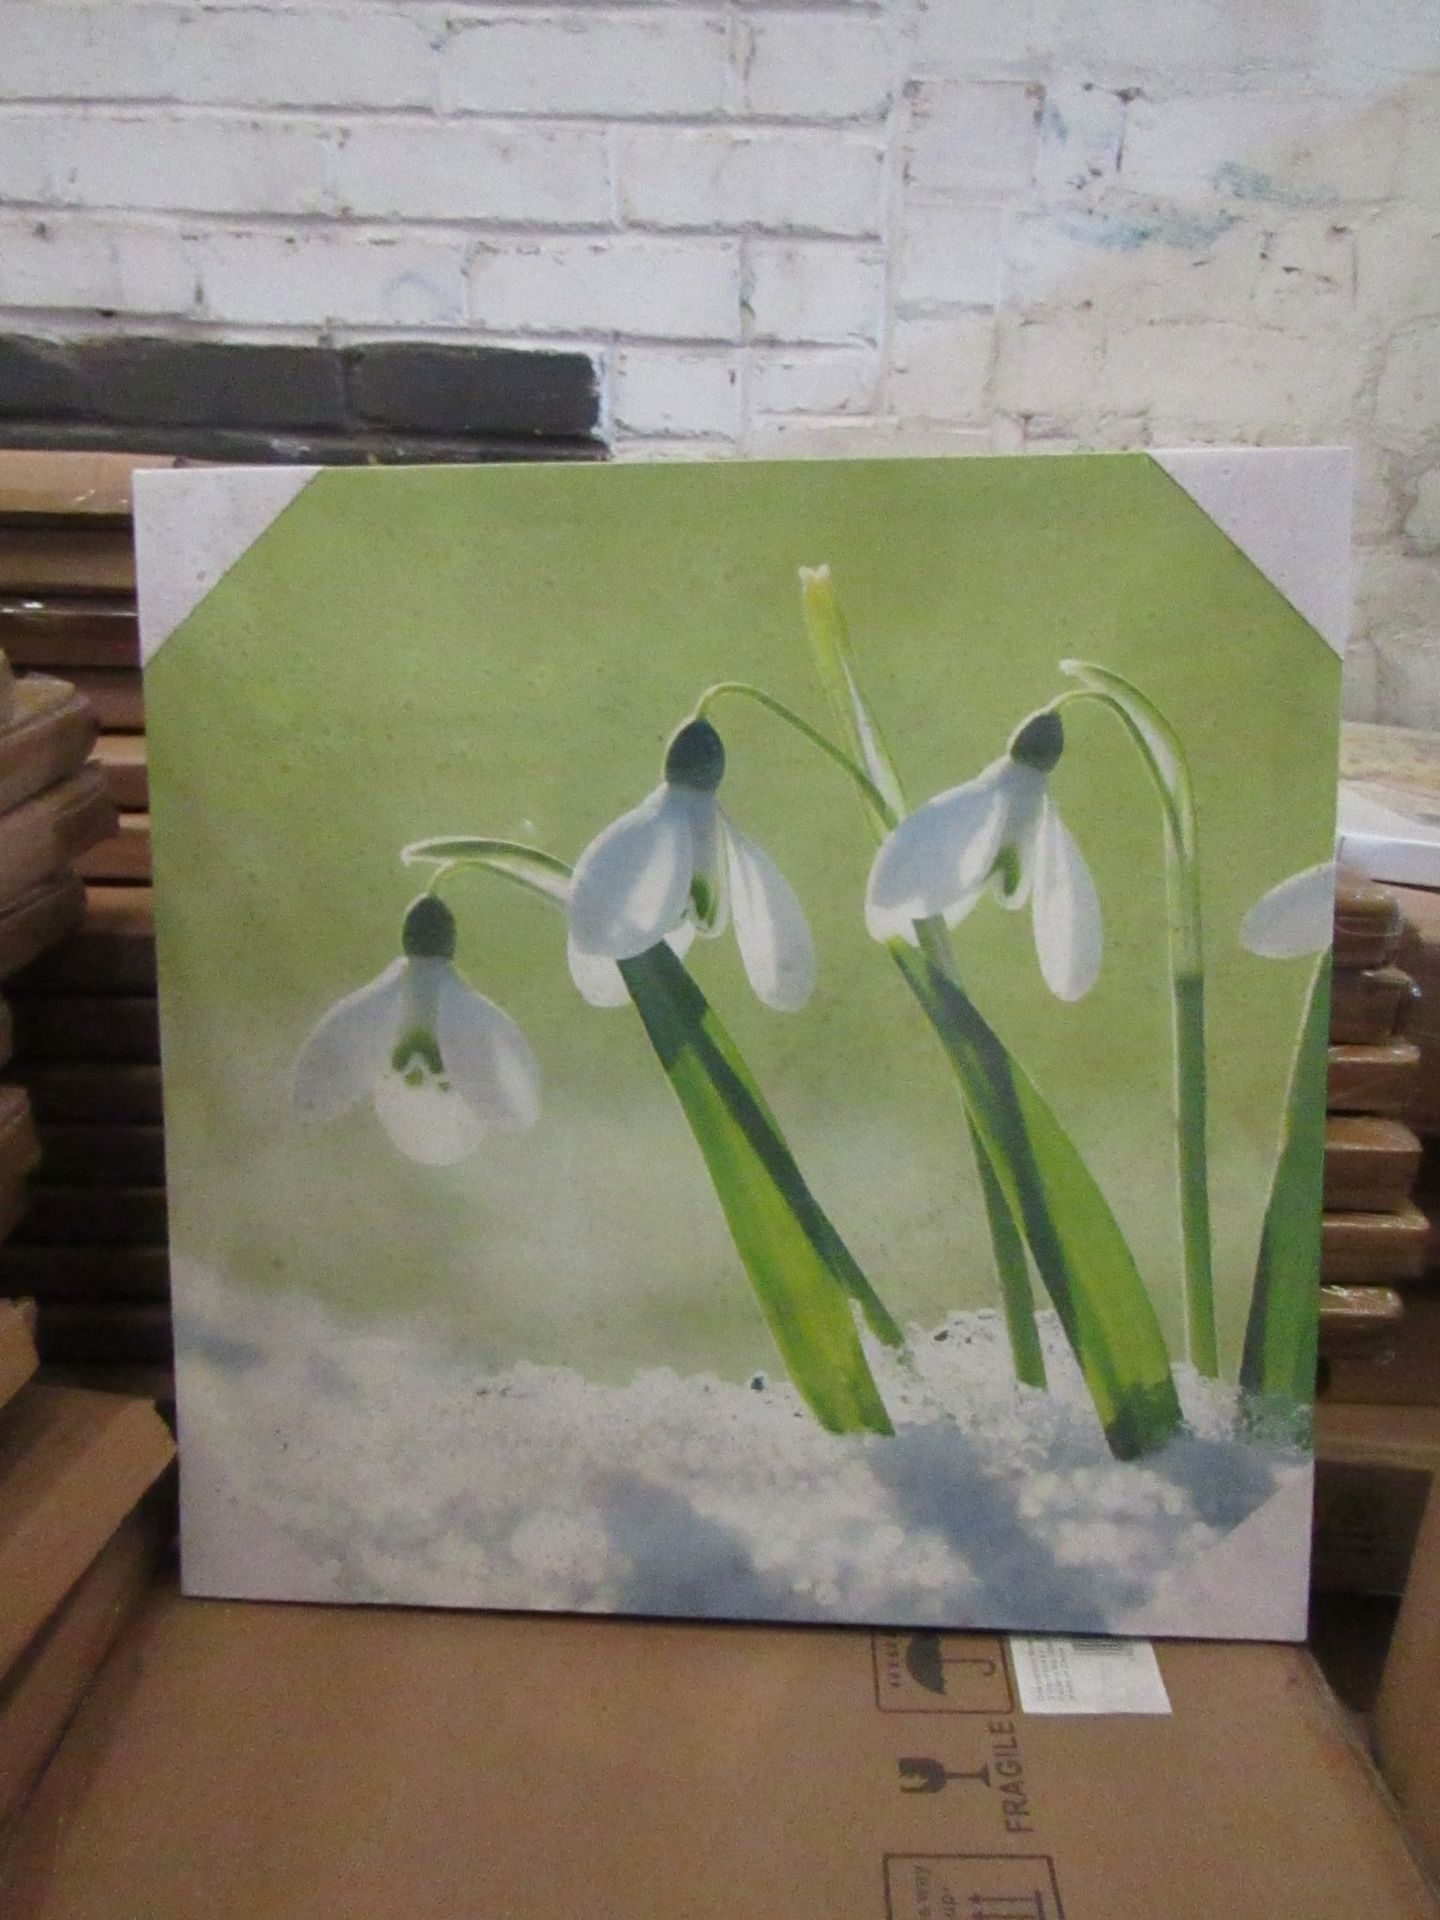 10 x "Snowdrops" Canvas Prints 48cm x 48cm new & packaged